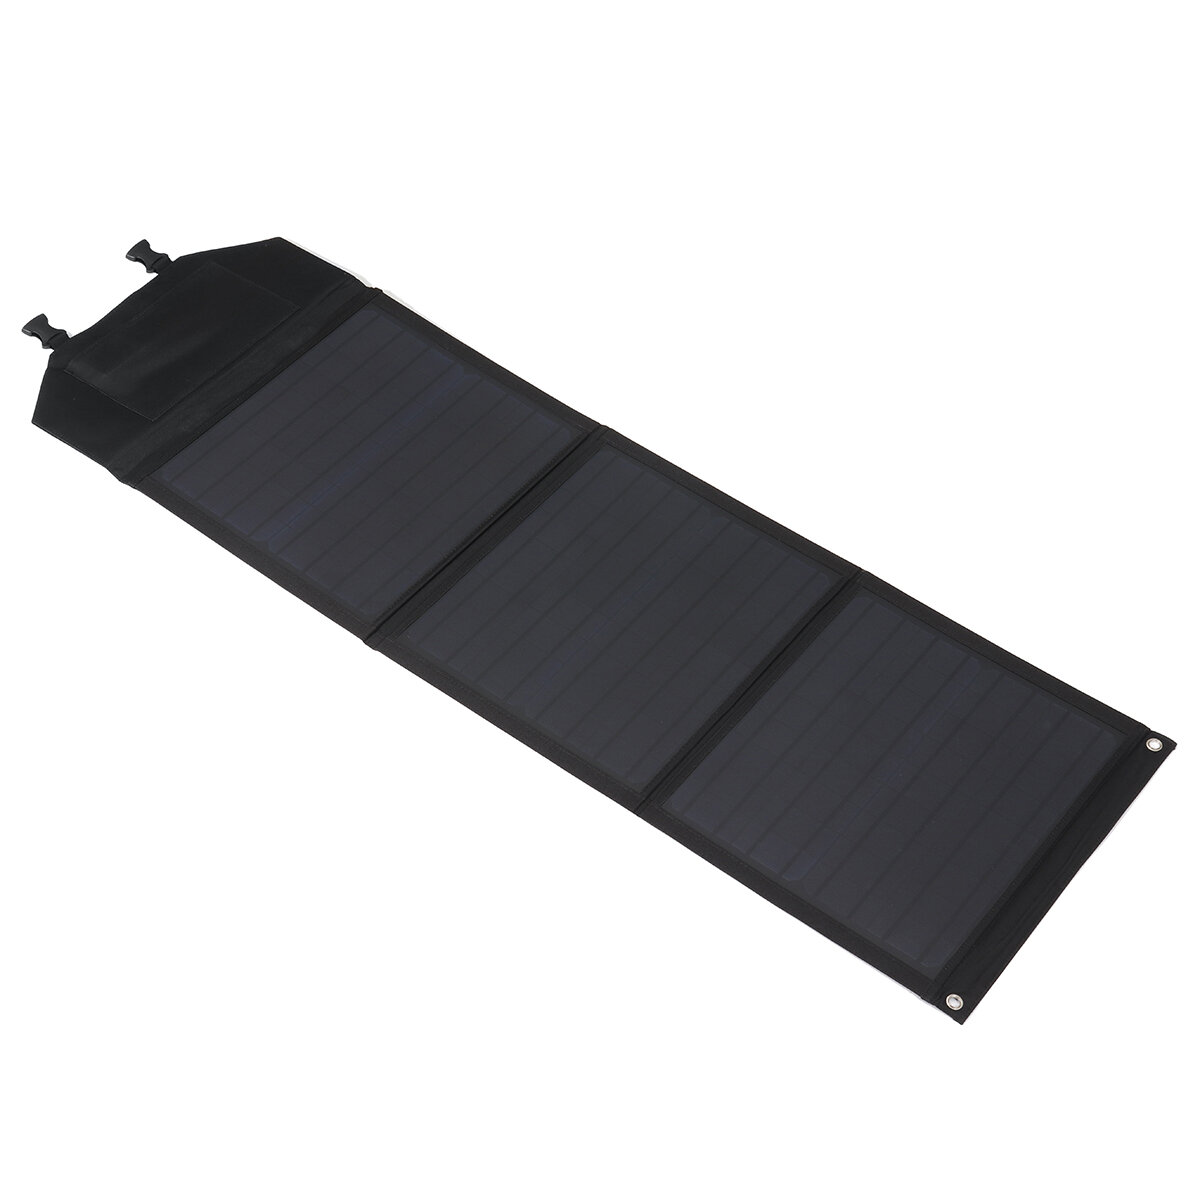 60W USB Solar Panel Folding Monocrystalline PET Power Chargerfor Phone RV Car MP3 PAD Charger Outdoor Battery Supply